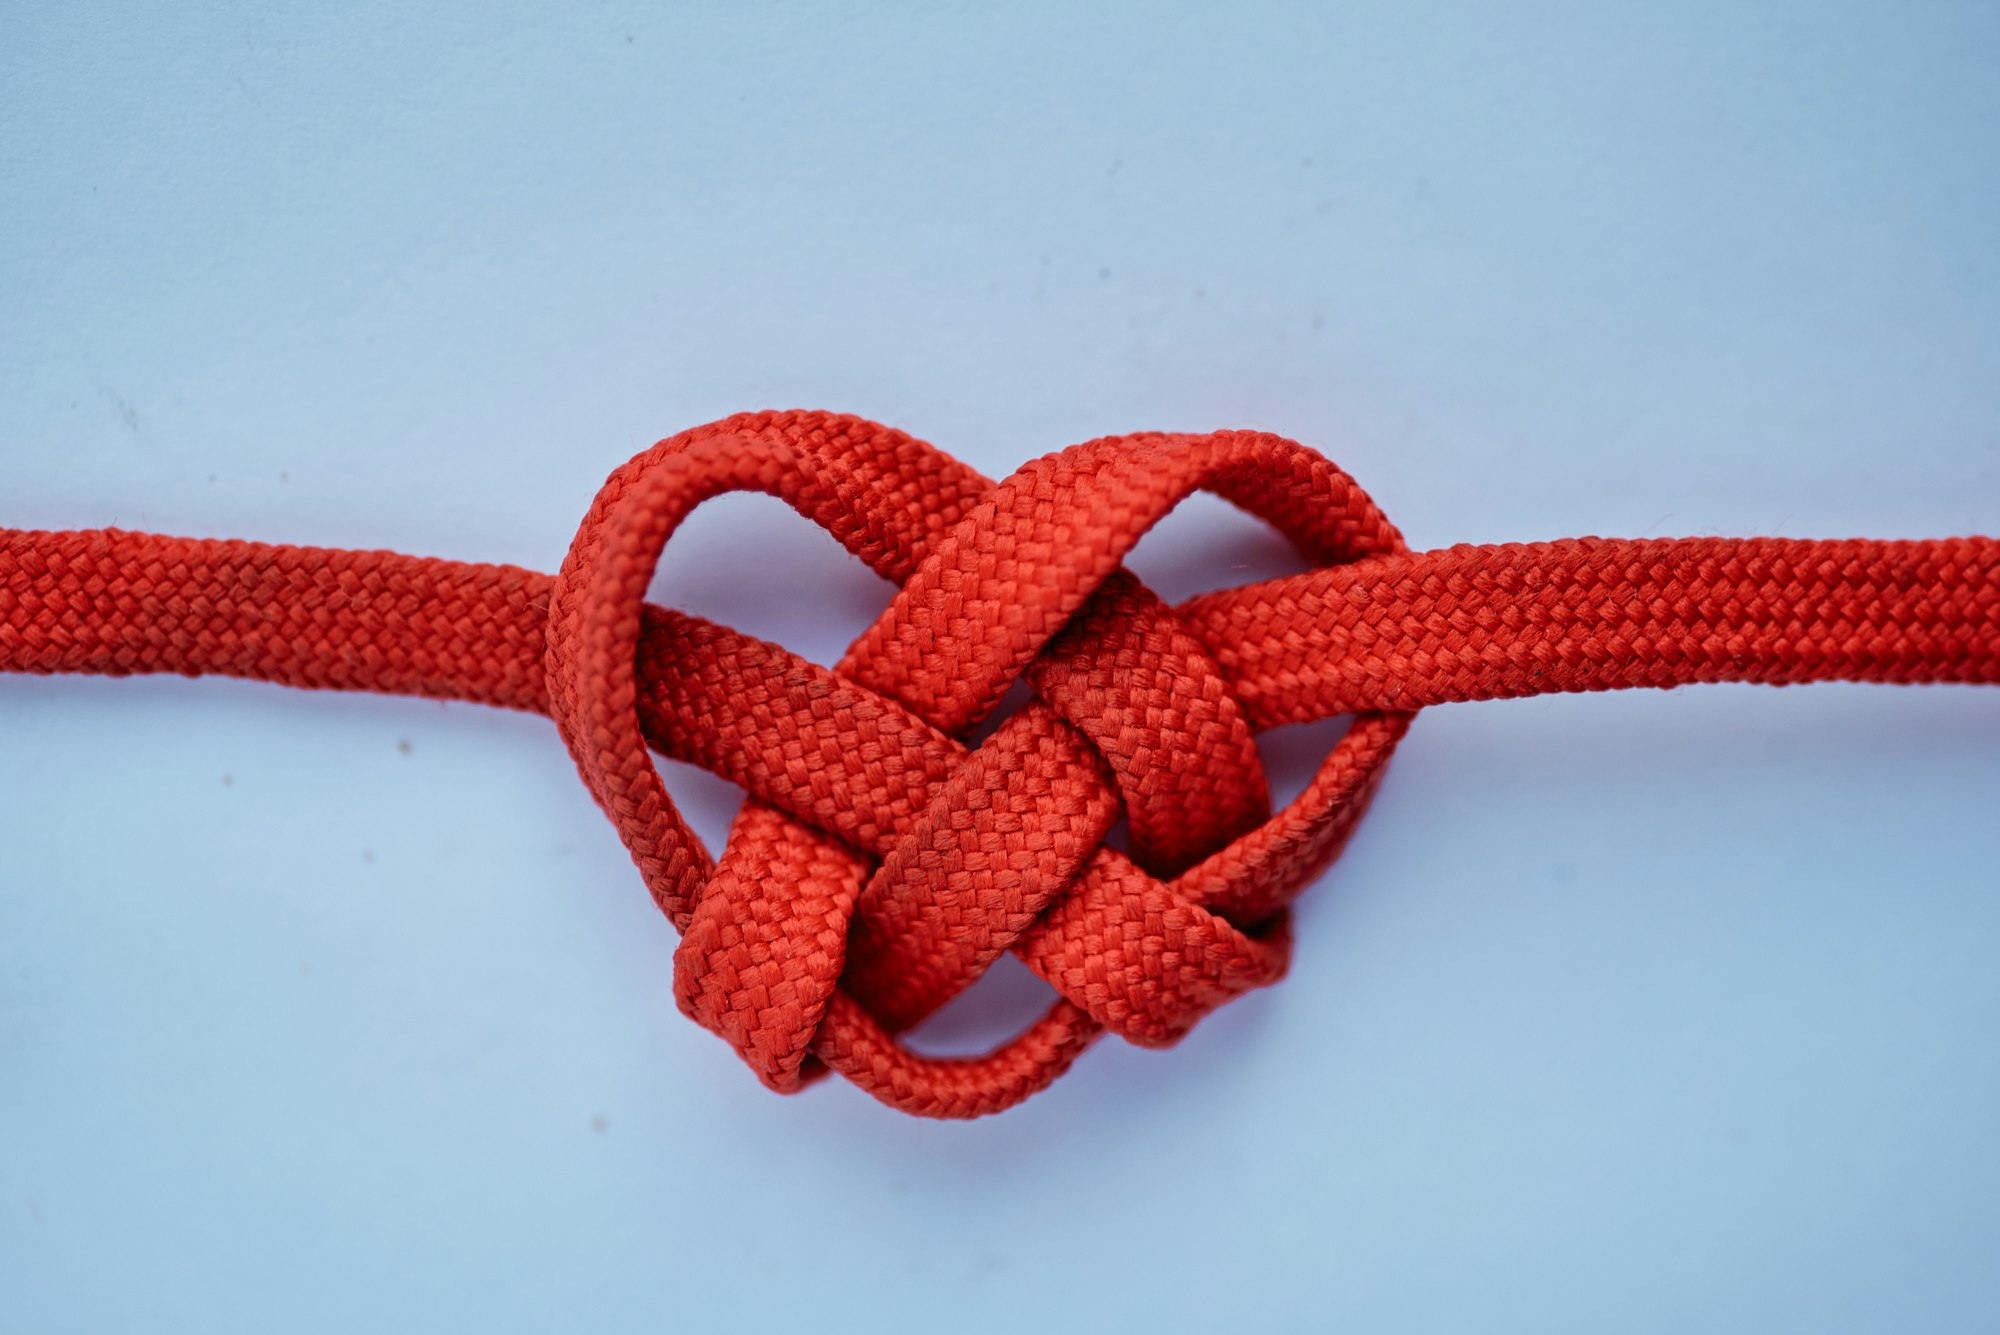 Shoelace knit into a heart shape in the depiction of love and marking of valentine.
